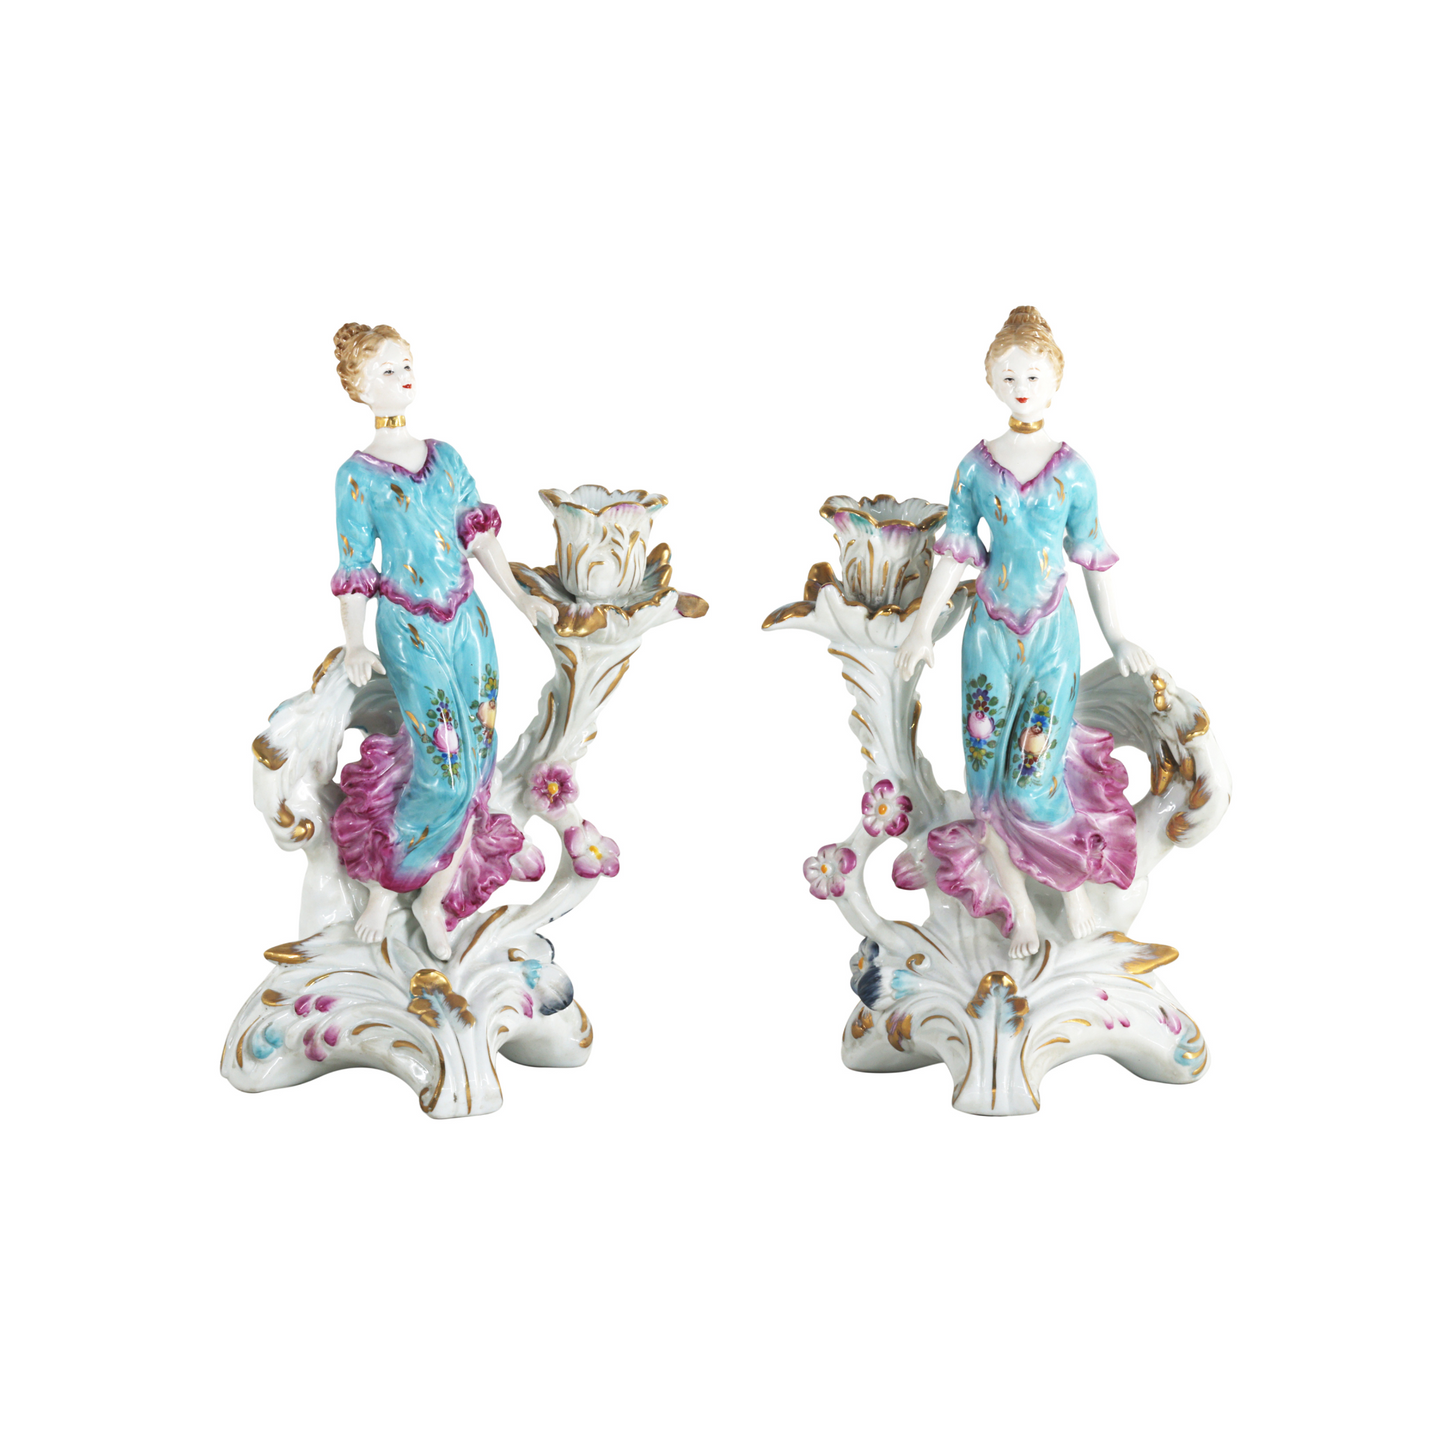 Pair of Hand-painted Porcelain Candlestick Holders